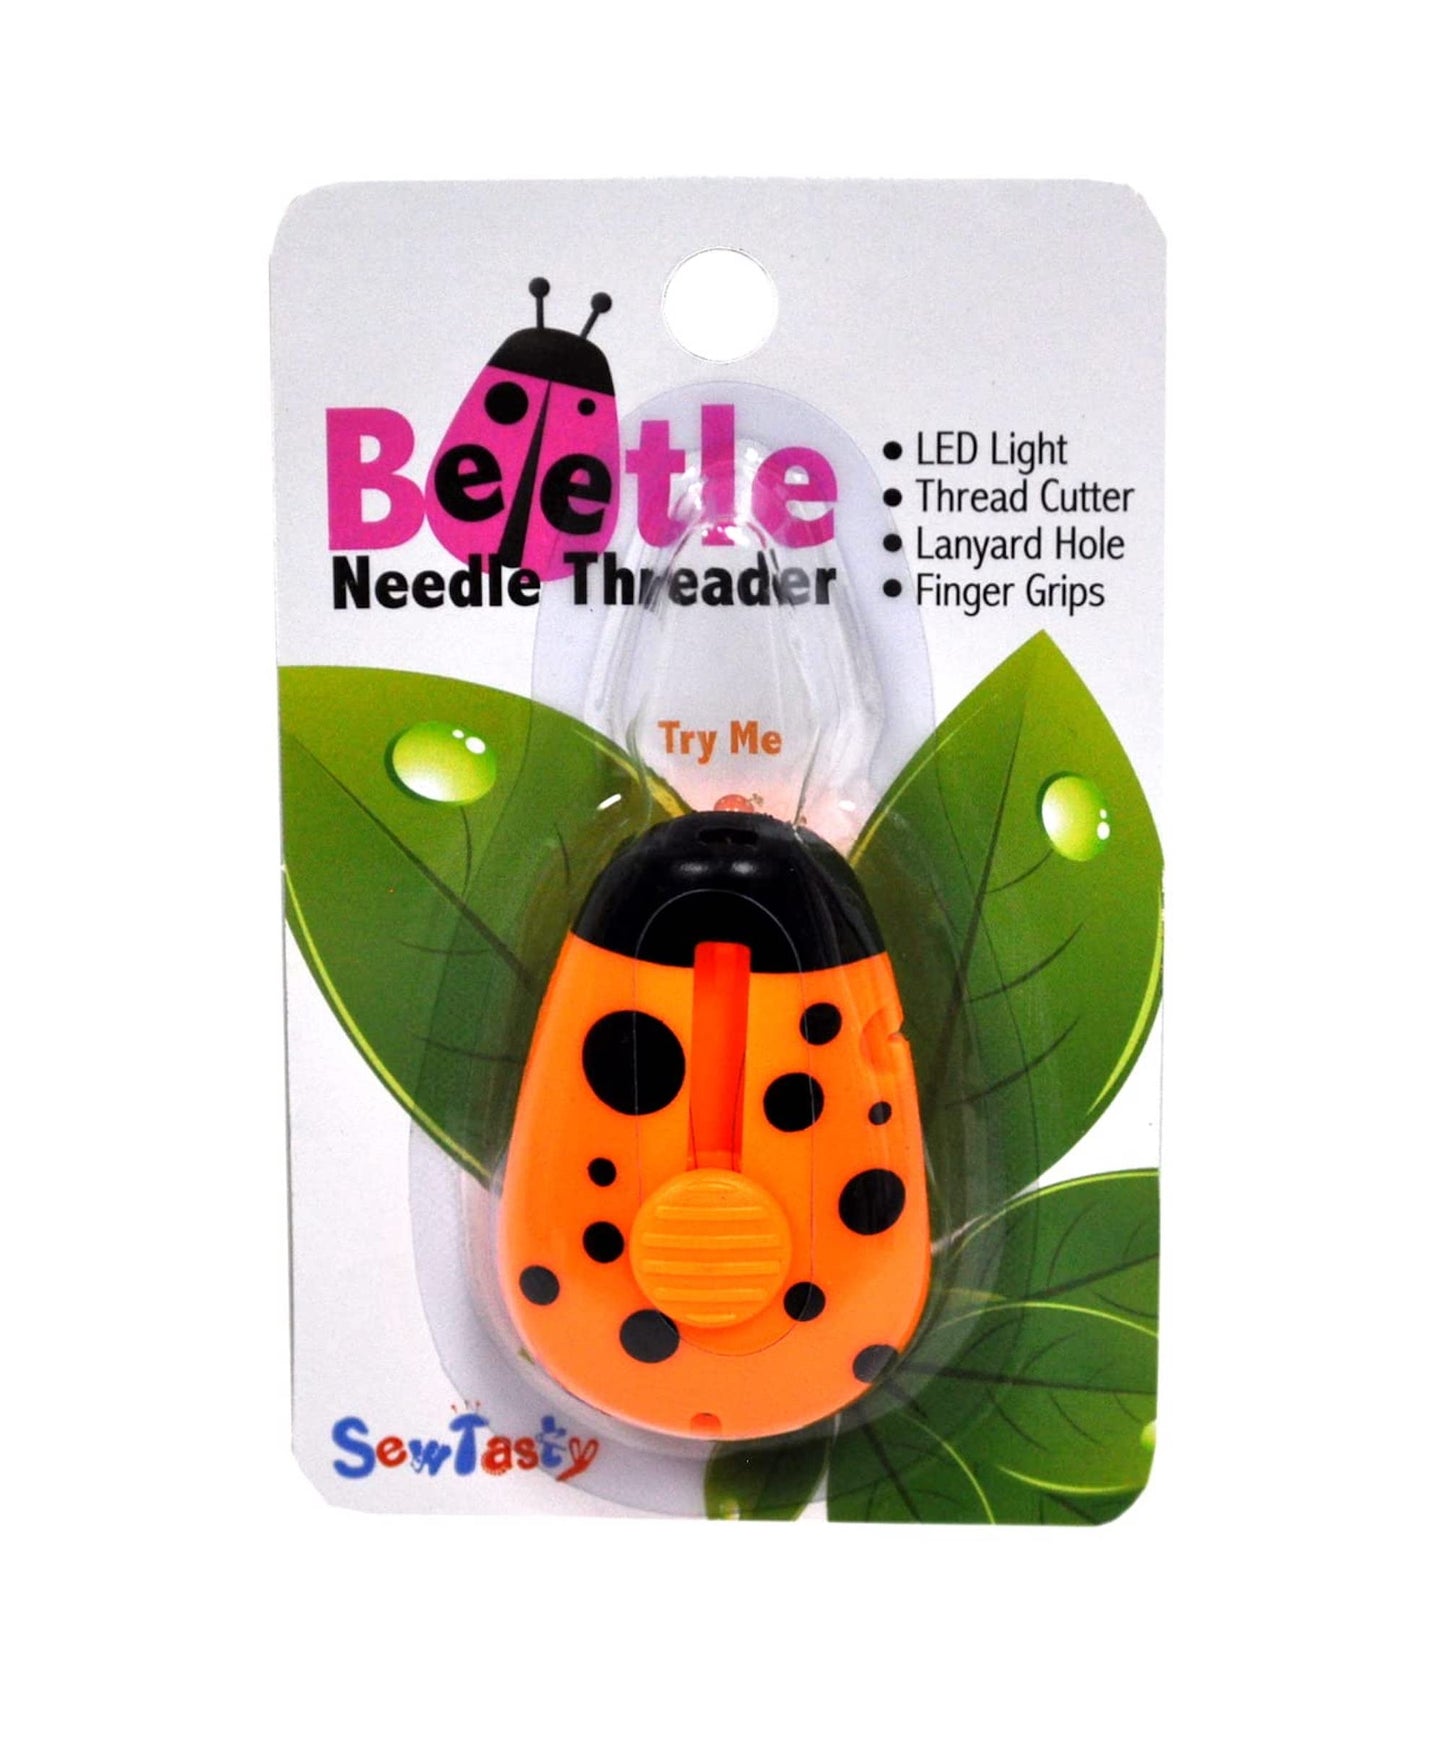 Beetle Needle Threader: 3 Color Choices.